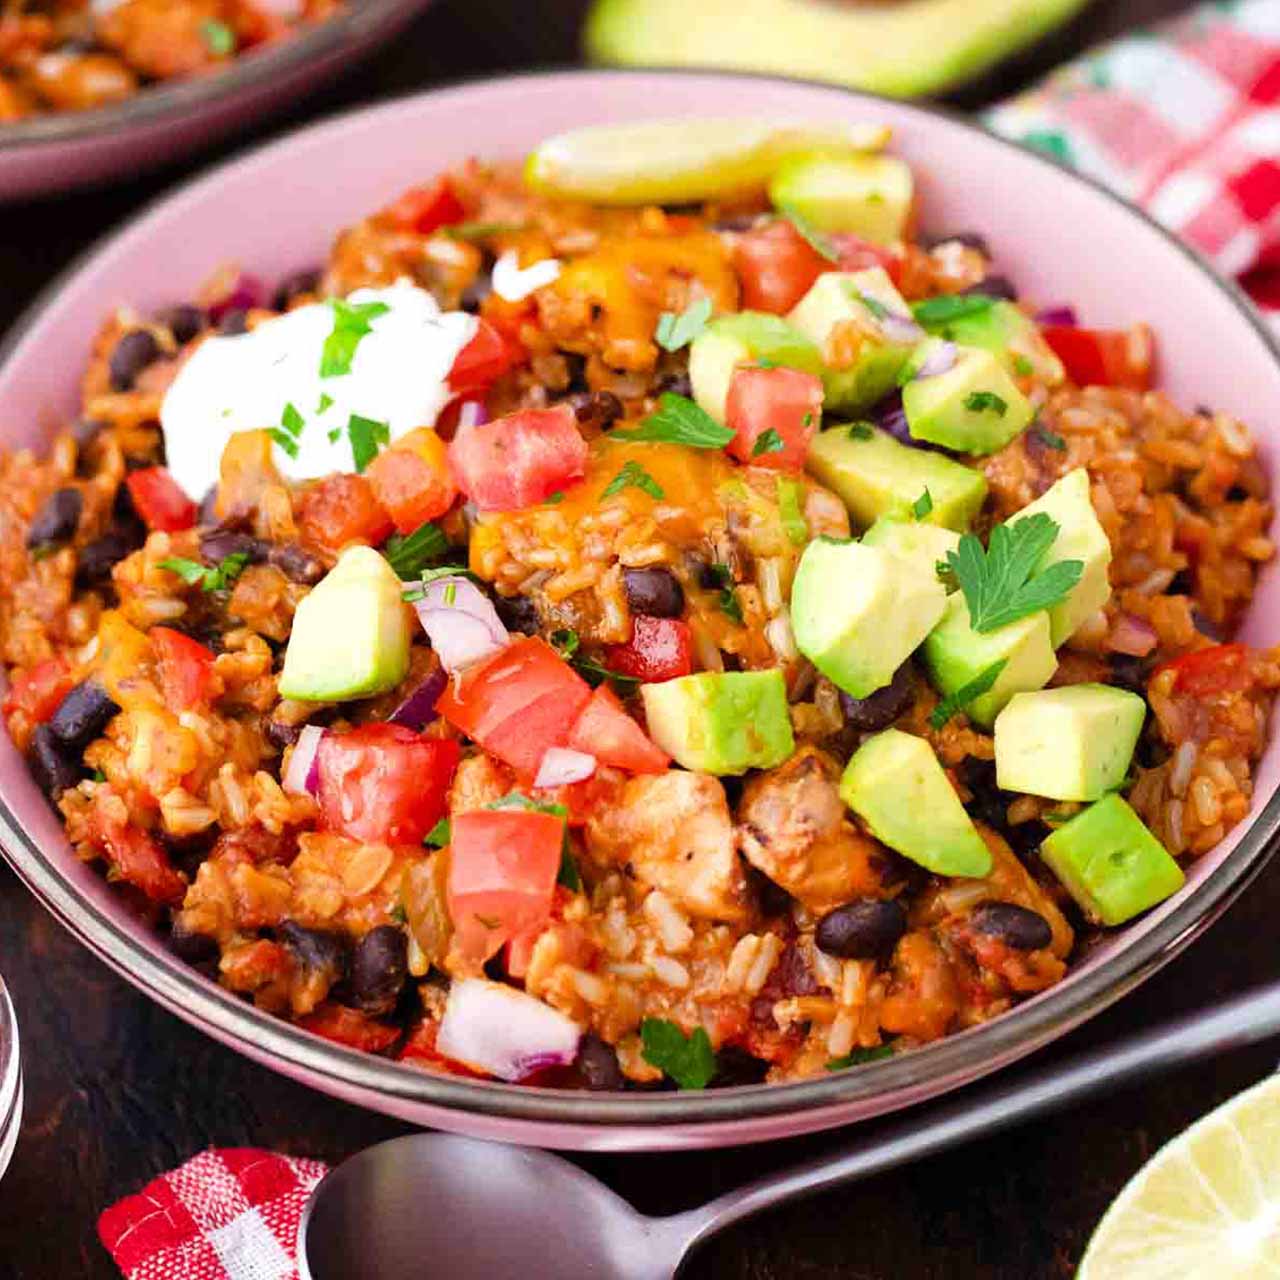 Fiesta Chicken Recipe - One Pan! - Sweet and Savory Meals